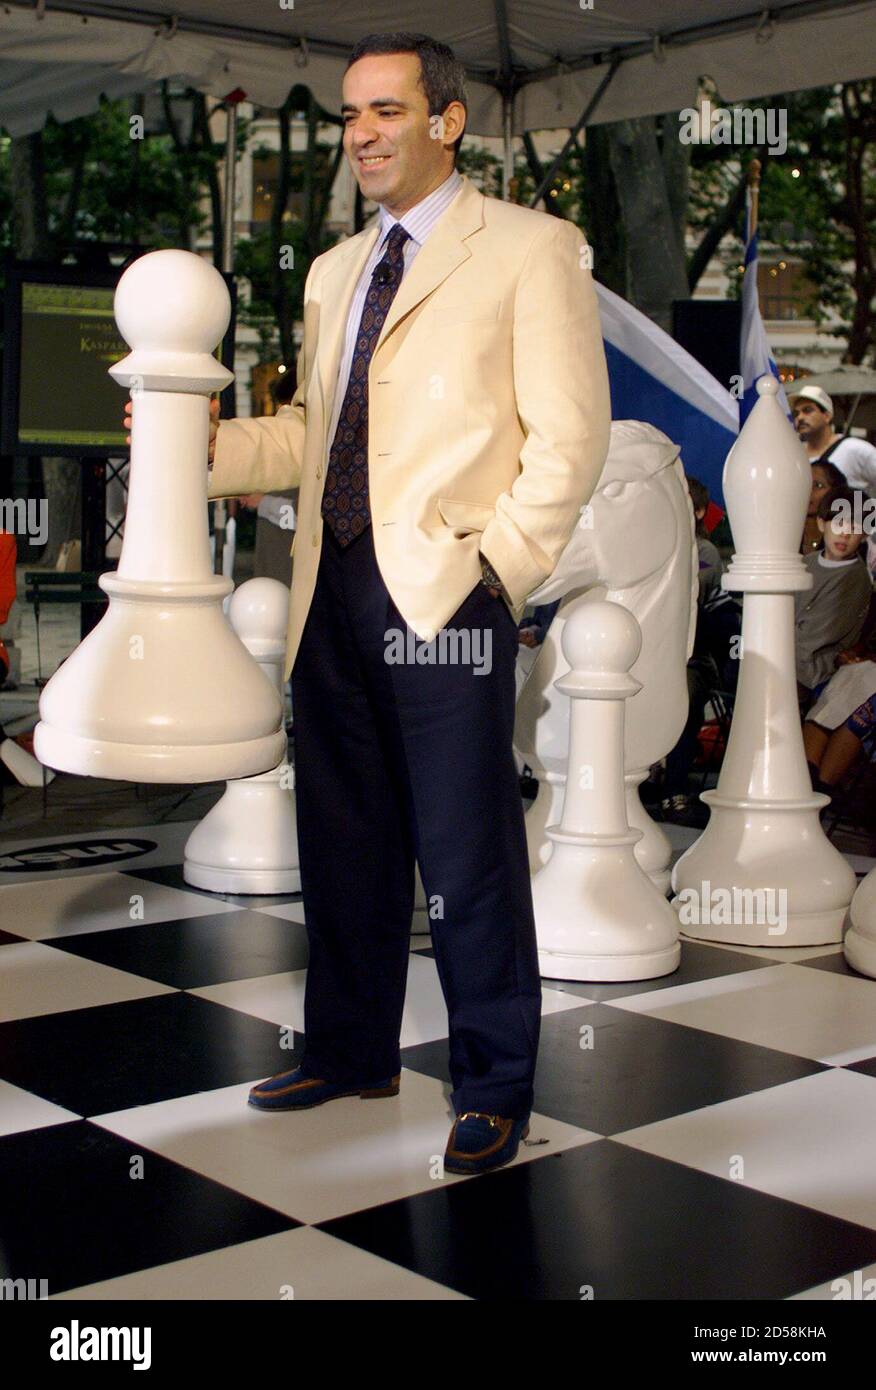 World Chess Champion Gary Kasparov makes his first move on a large chess  board in New York's Bryant Park June 21 during an Internet chess game where  he will take on players